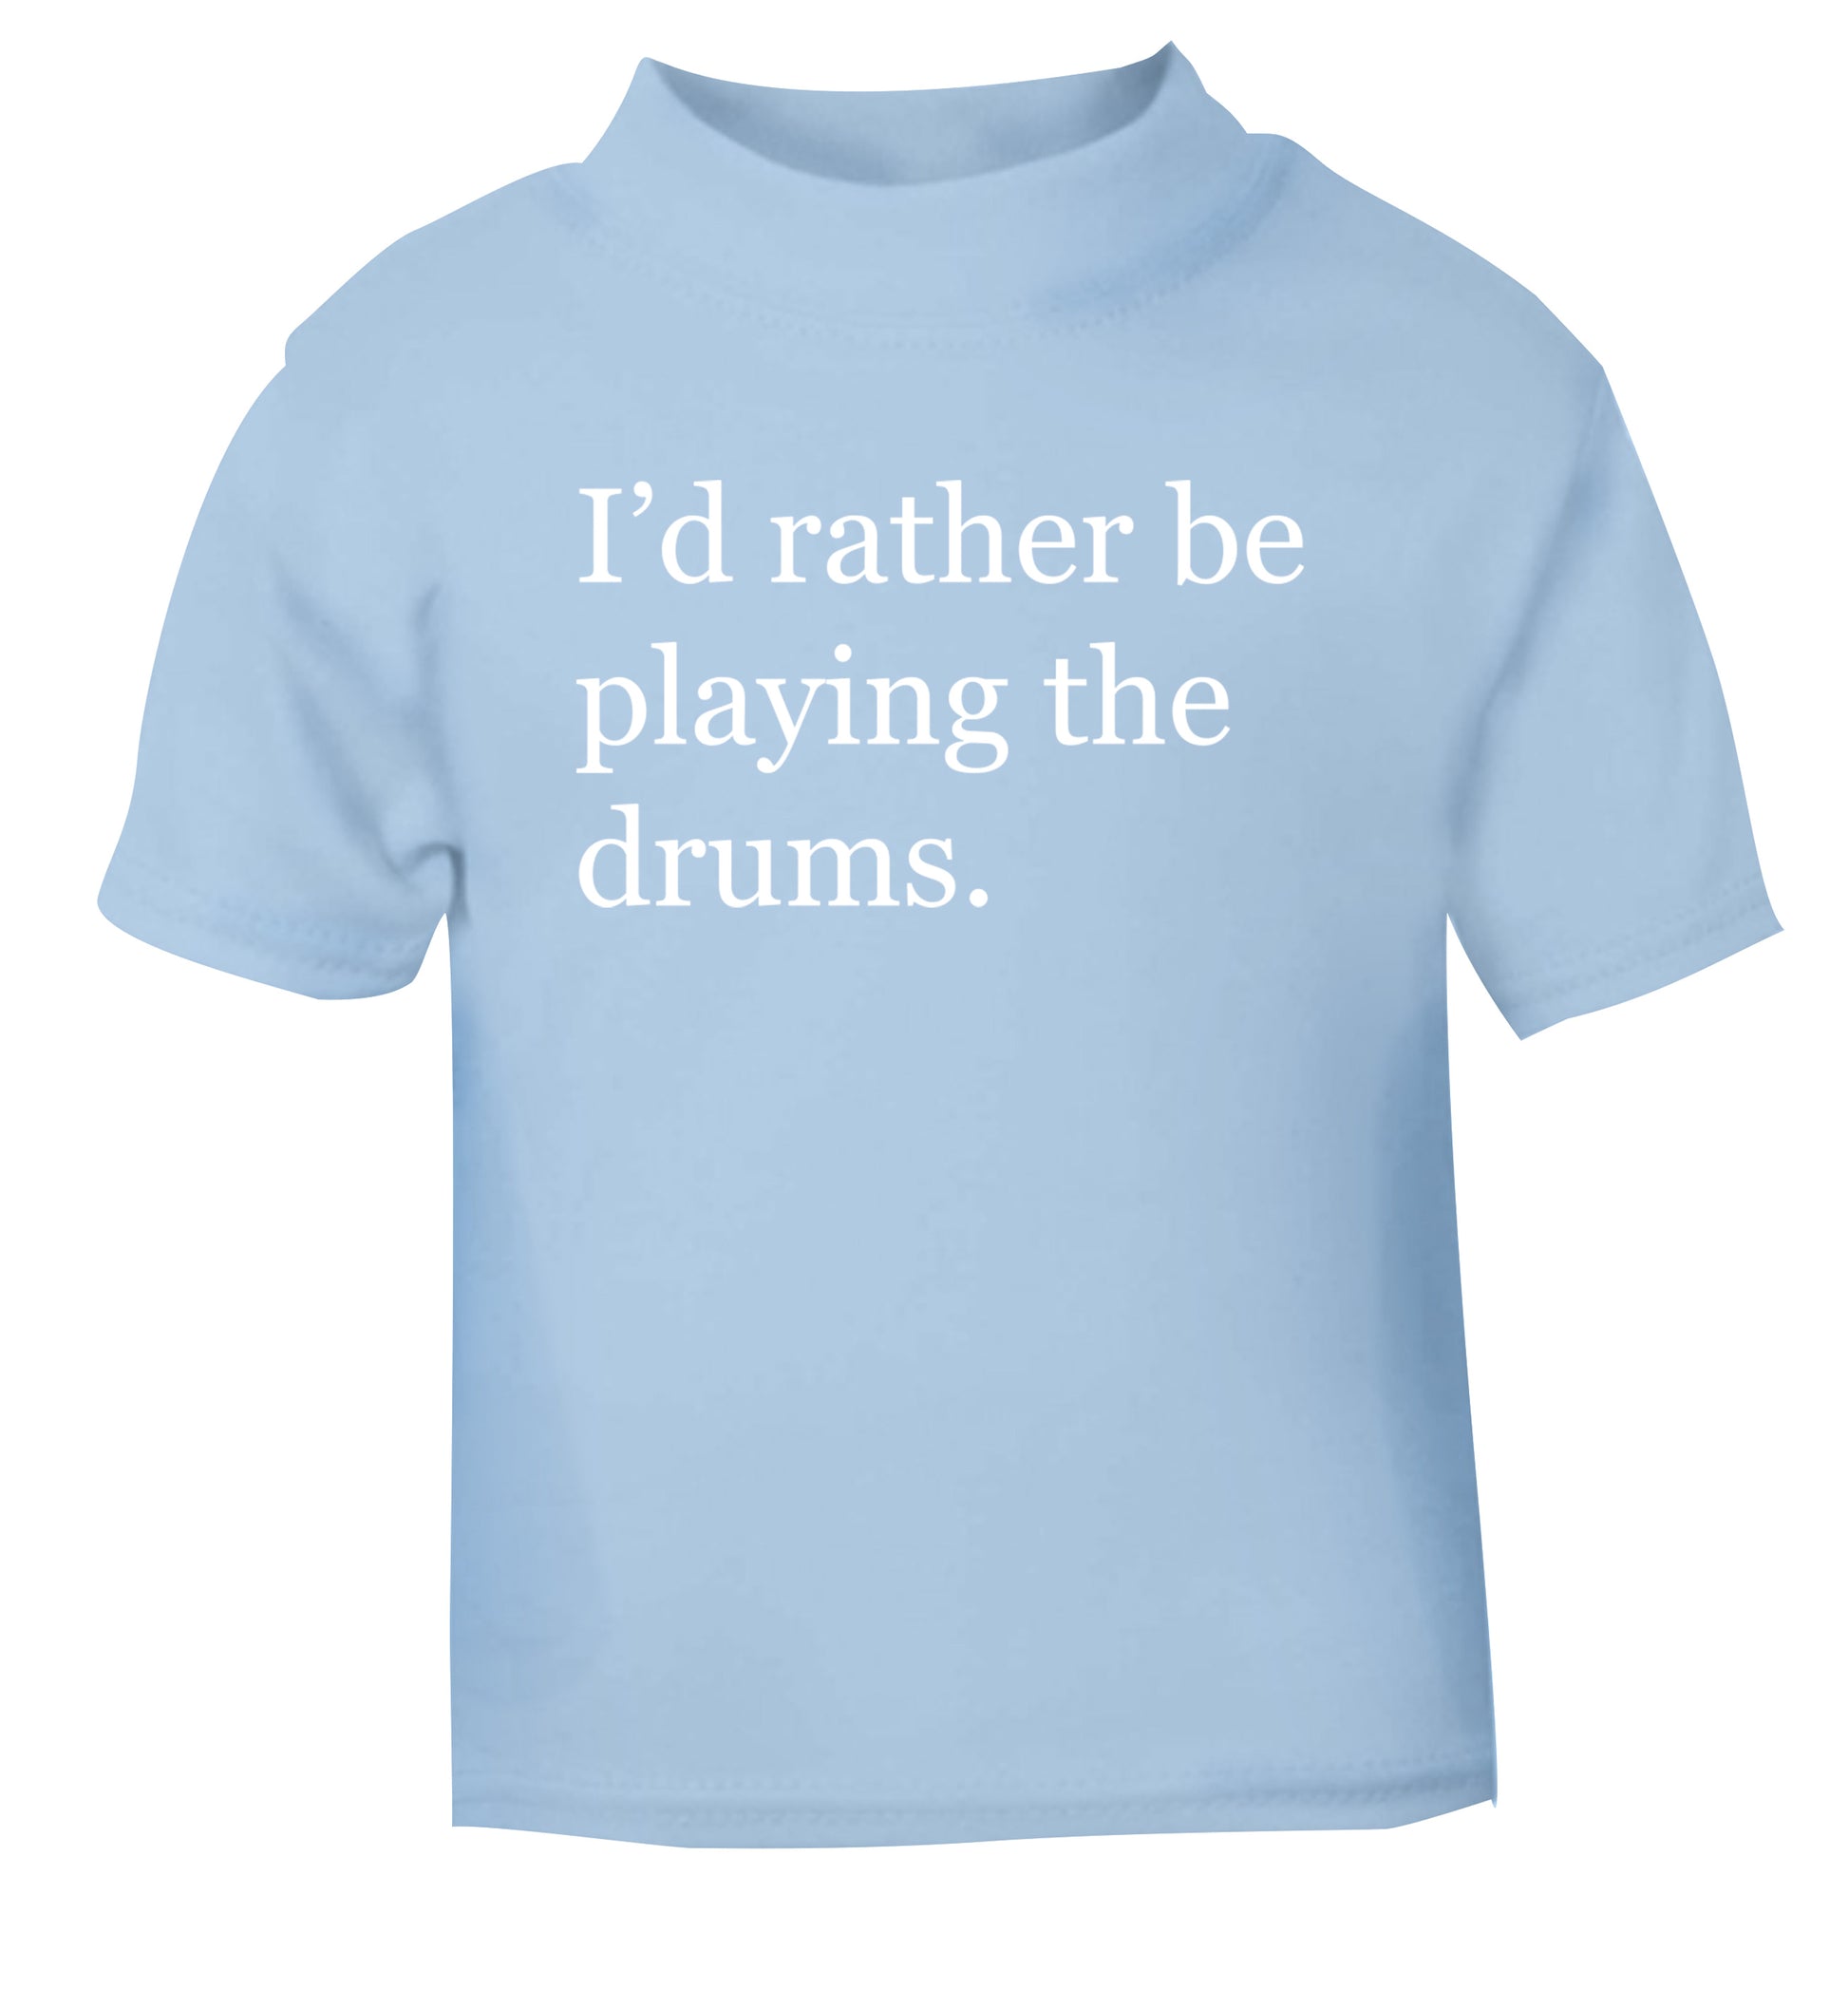 I'd rather be playing the drums light blue Baby Toddler Tshirt 2 Years